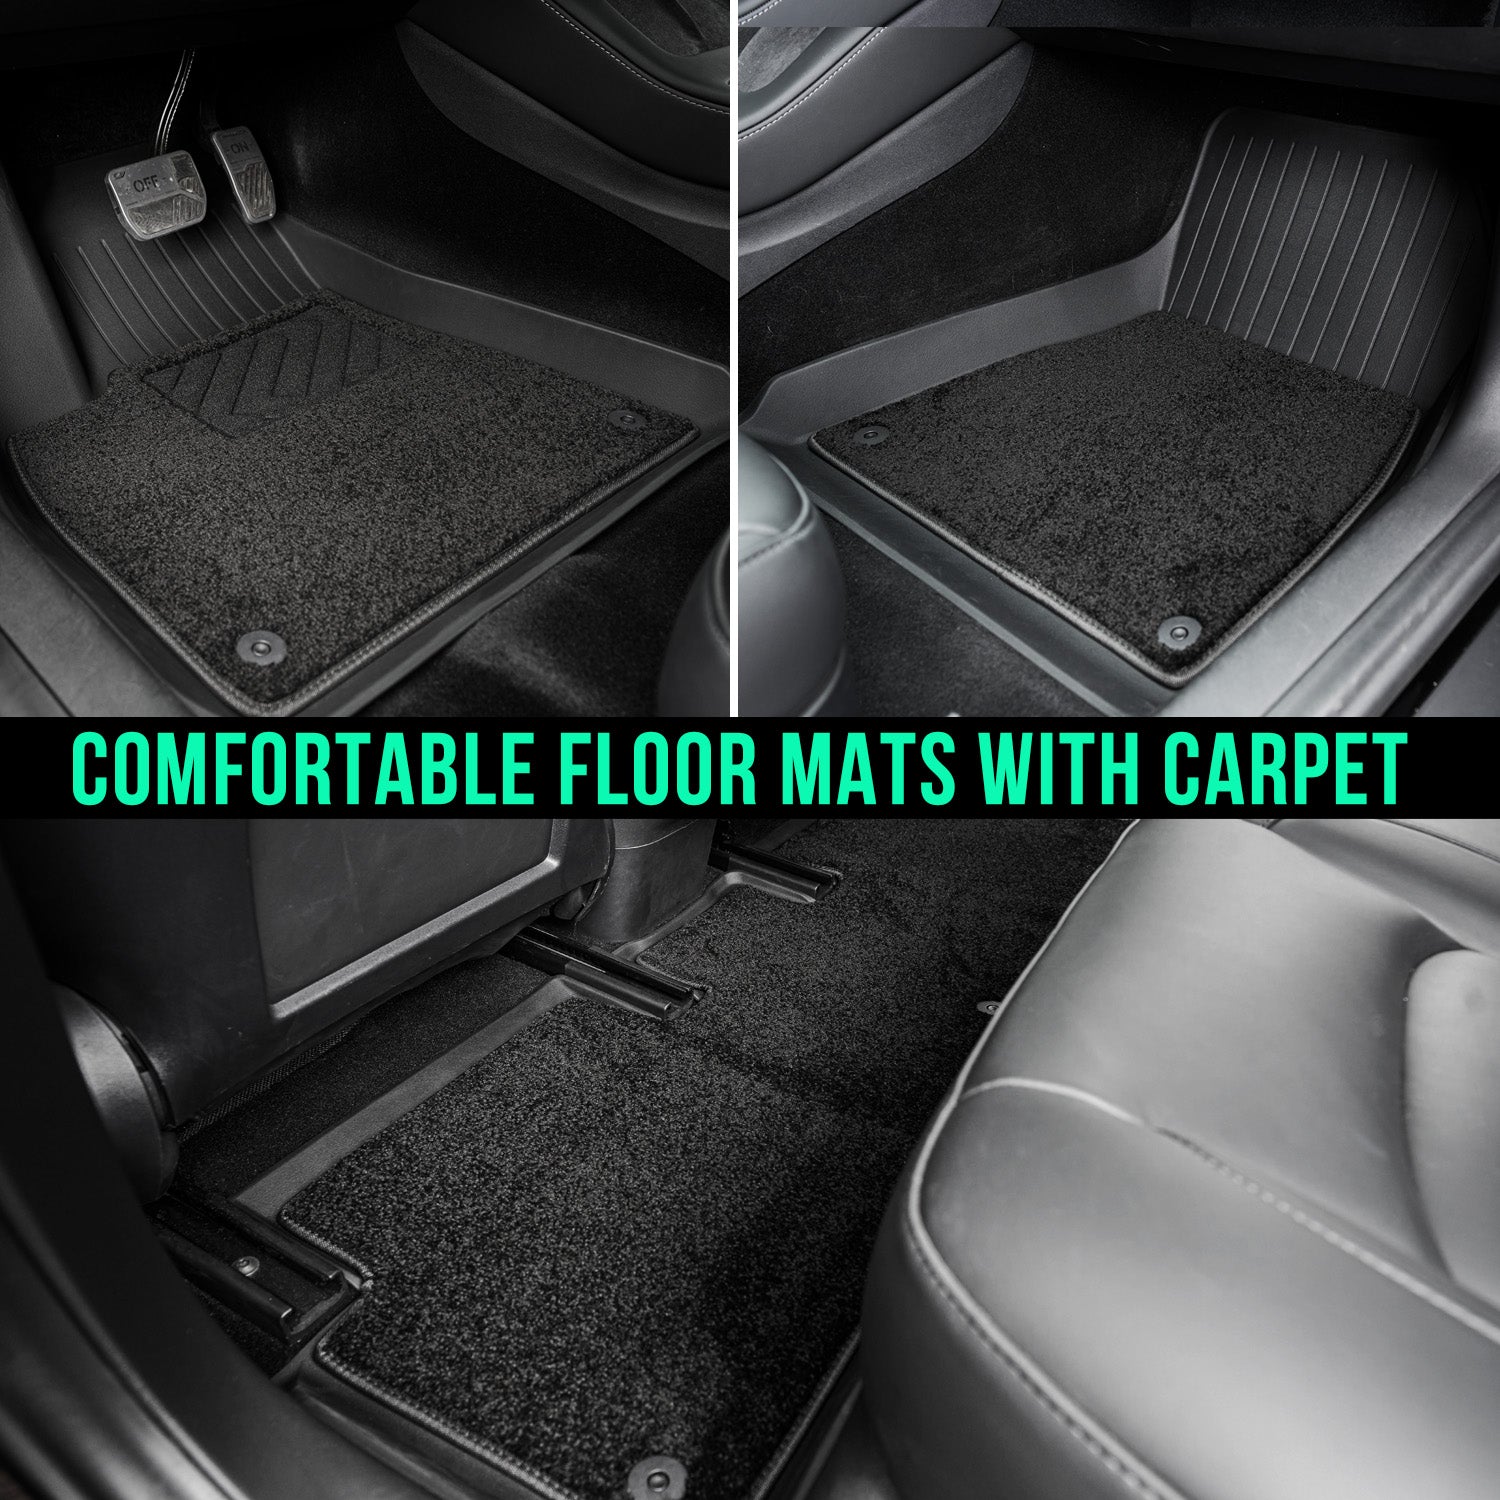 2-in-1 TPE All Weather Model 3 Floor Mats 2023 with Removable Carpet (Left Hand), Waterproof Anti-Slip Floor Mats for Model 3